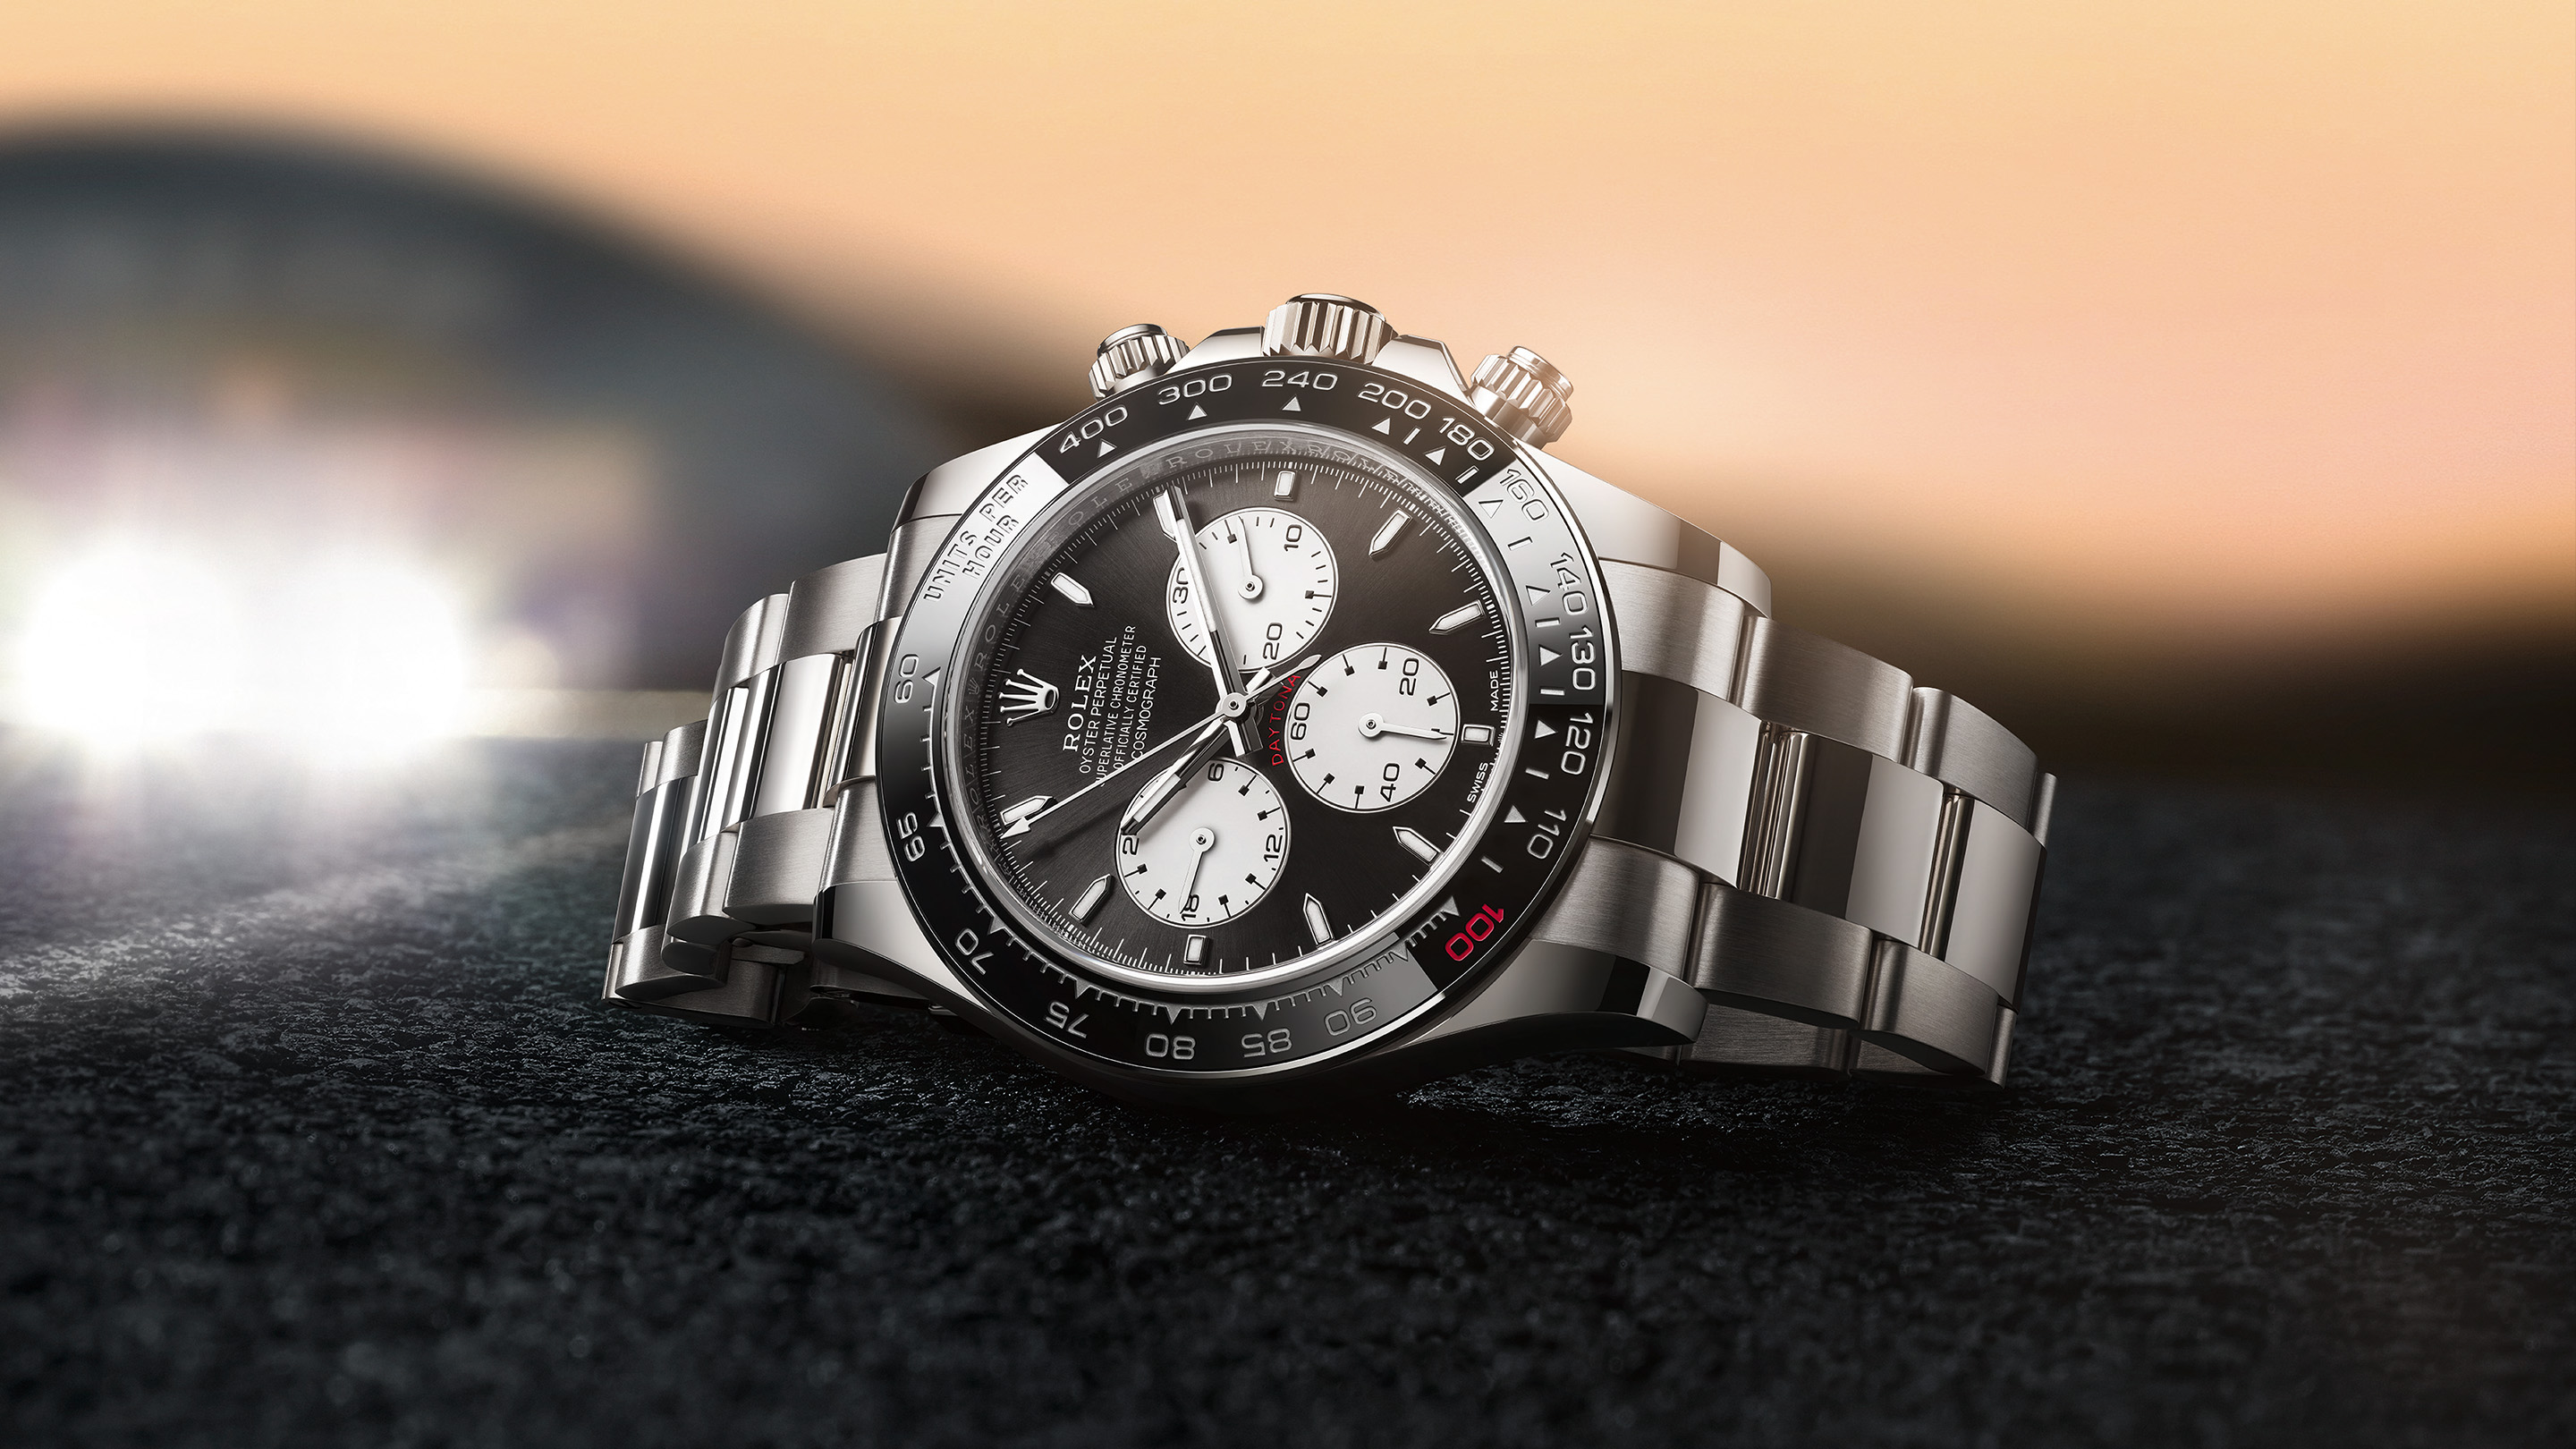 Introducing: A Special Rolex Daytona For The 100th Running Of The 